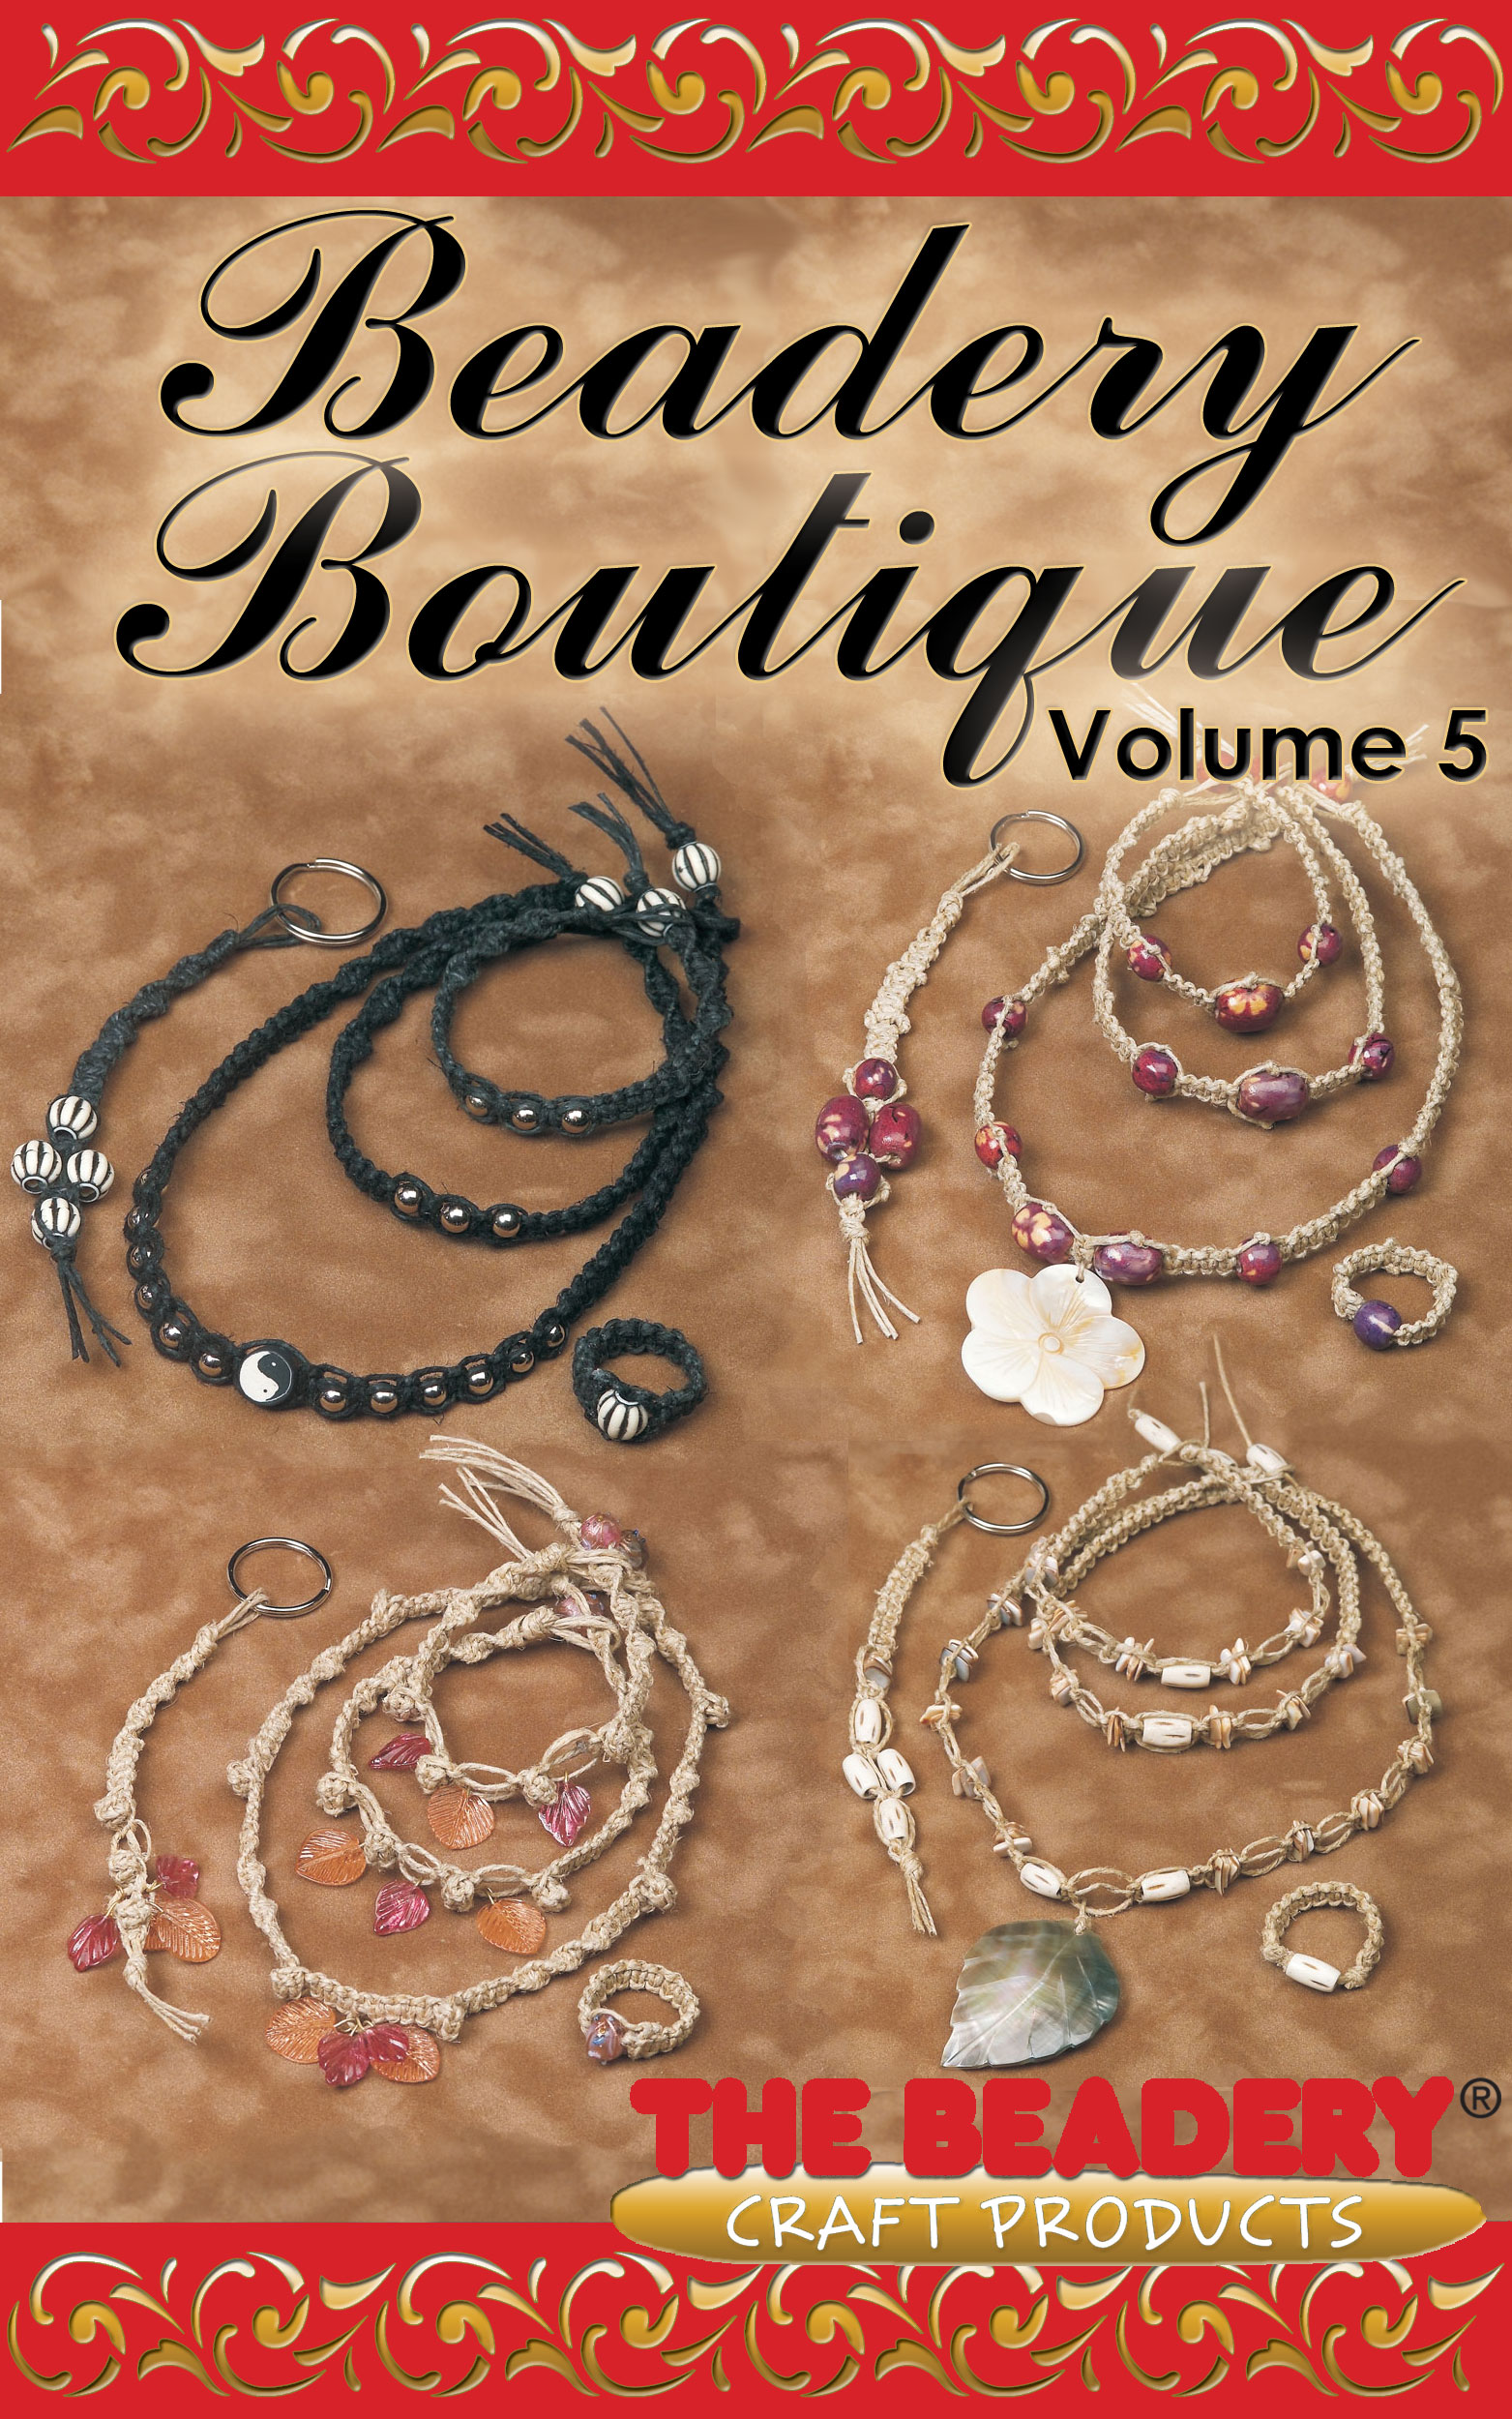 Beadery Boutique Vol. 5 – Featuring the Rest of the Makes 5 Hemp Kits